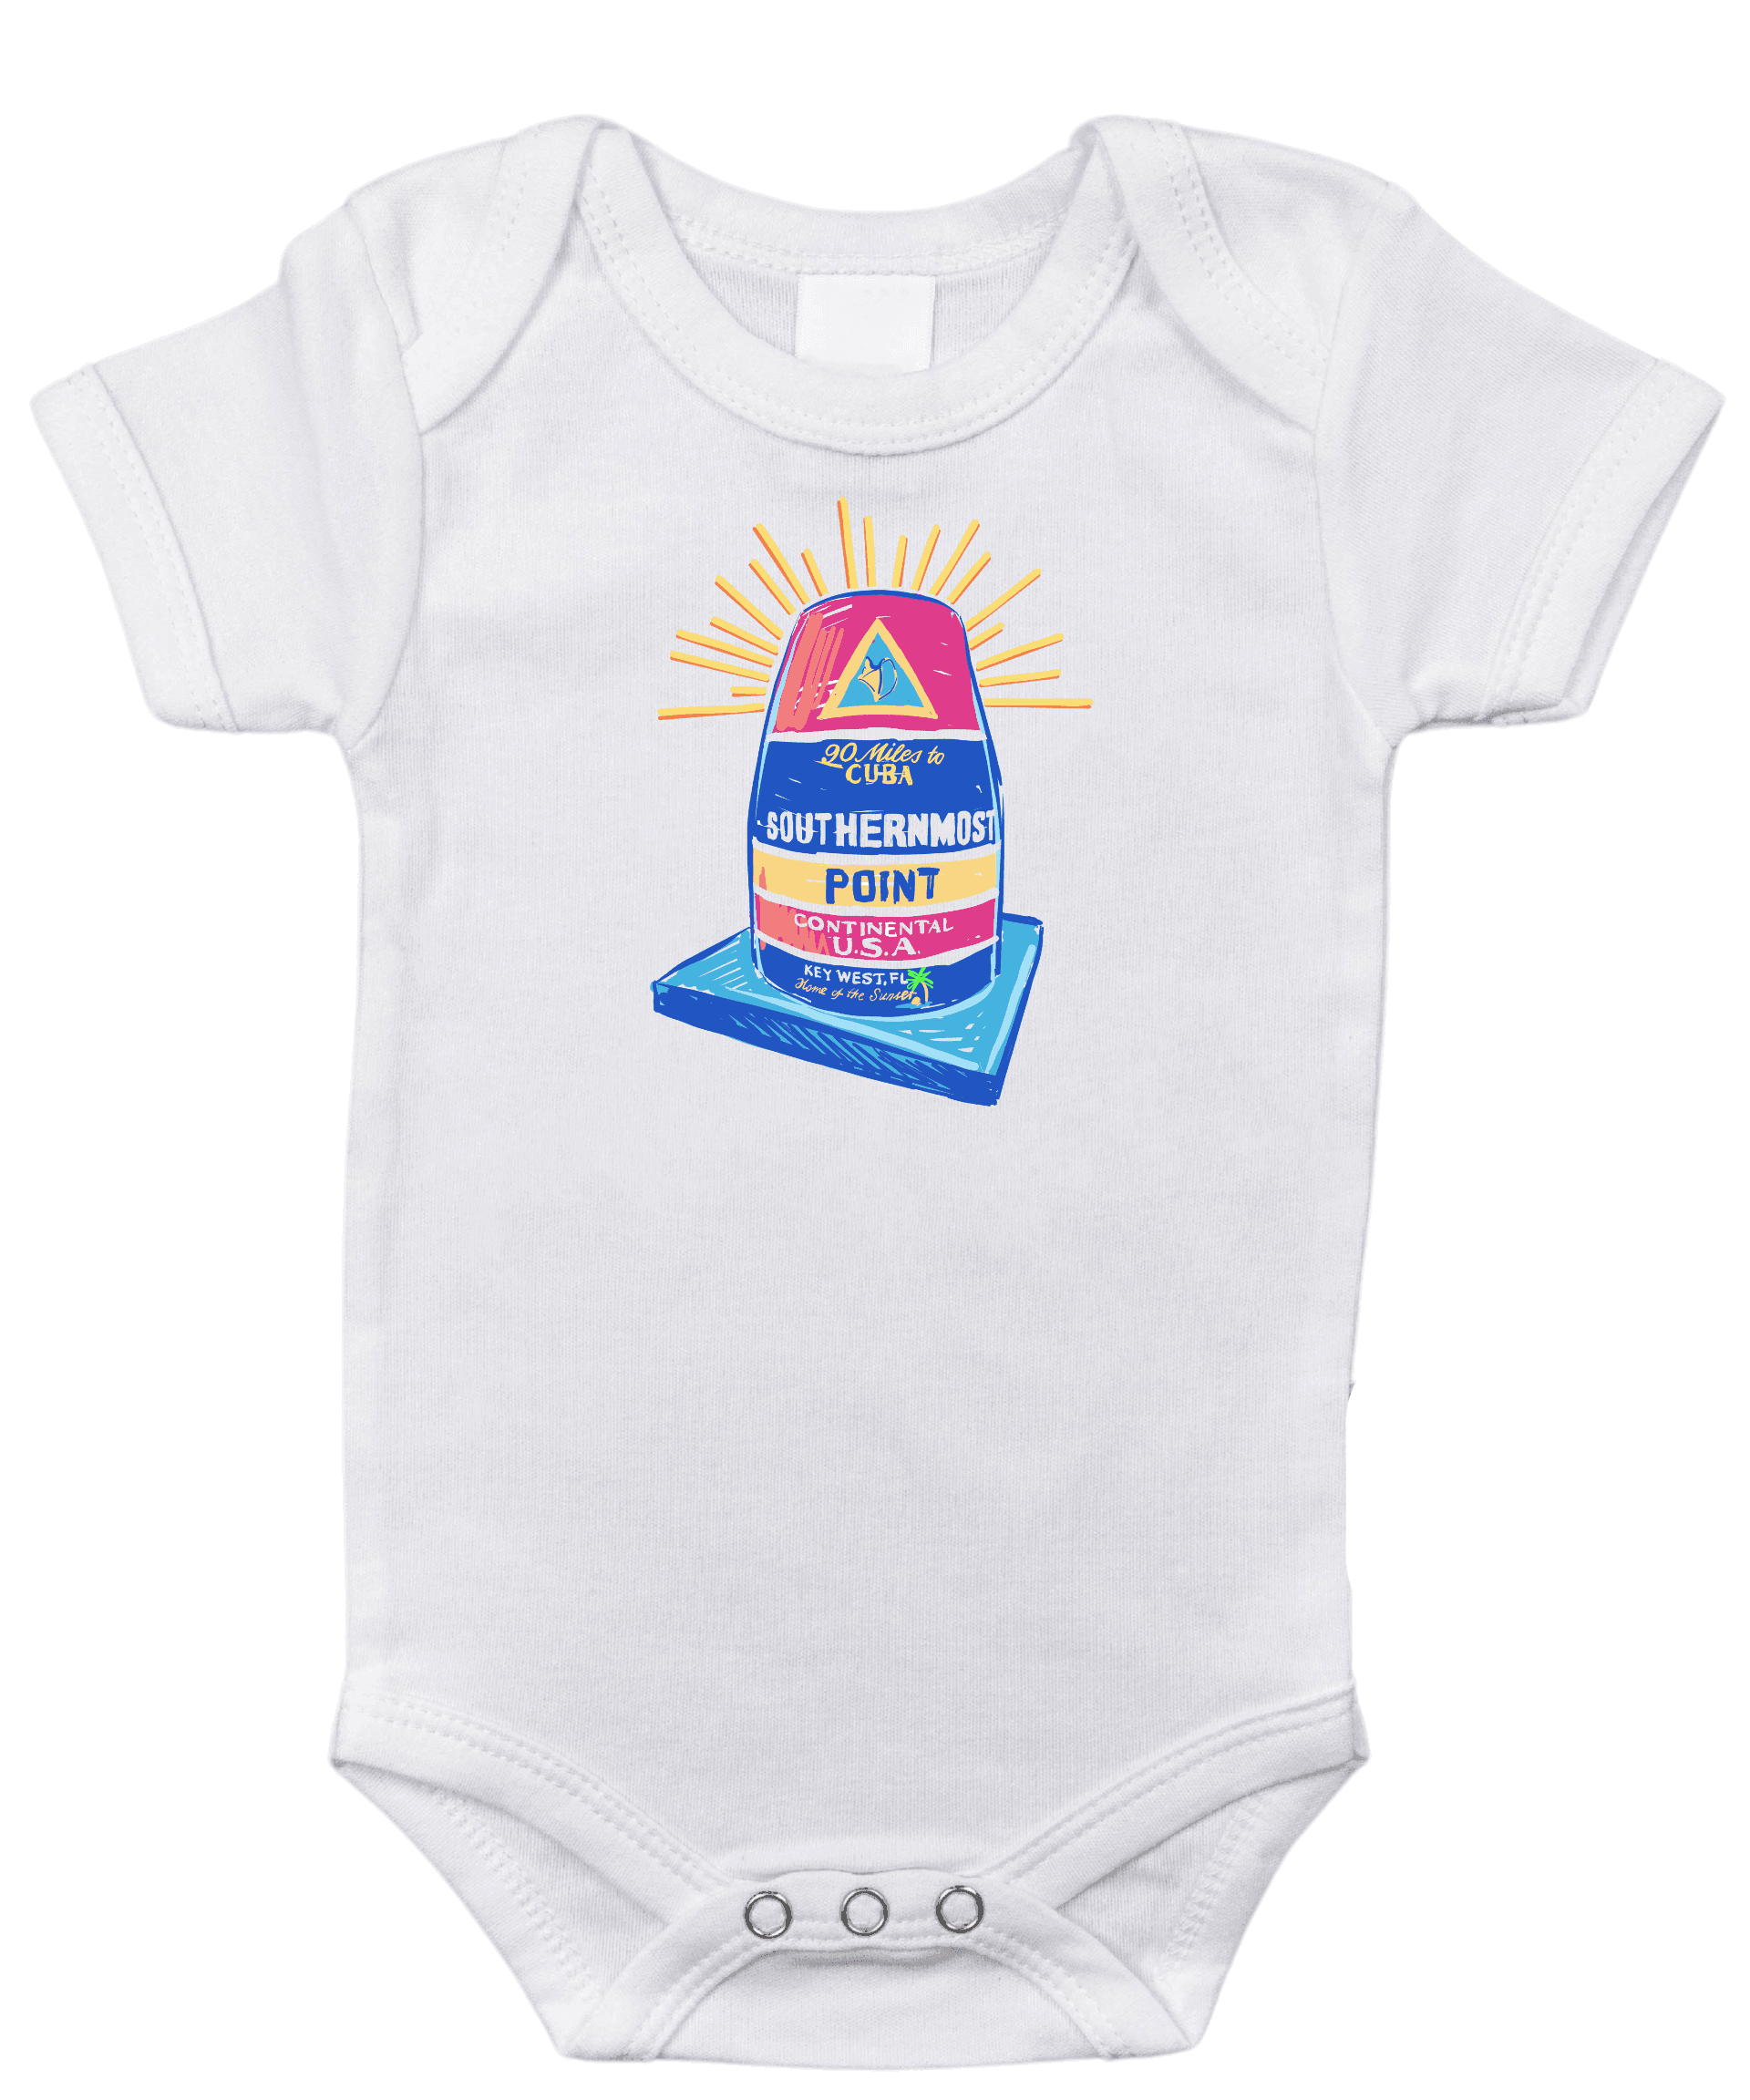 White baby onesie with "Key West, Florida" and a colorful sunset graphic, featuring palm trees and ocean waves.